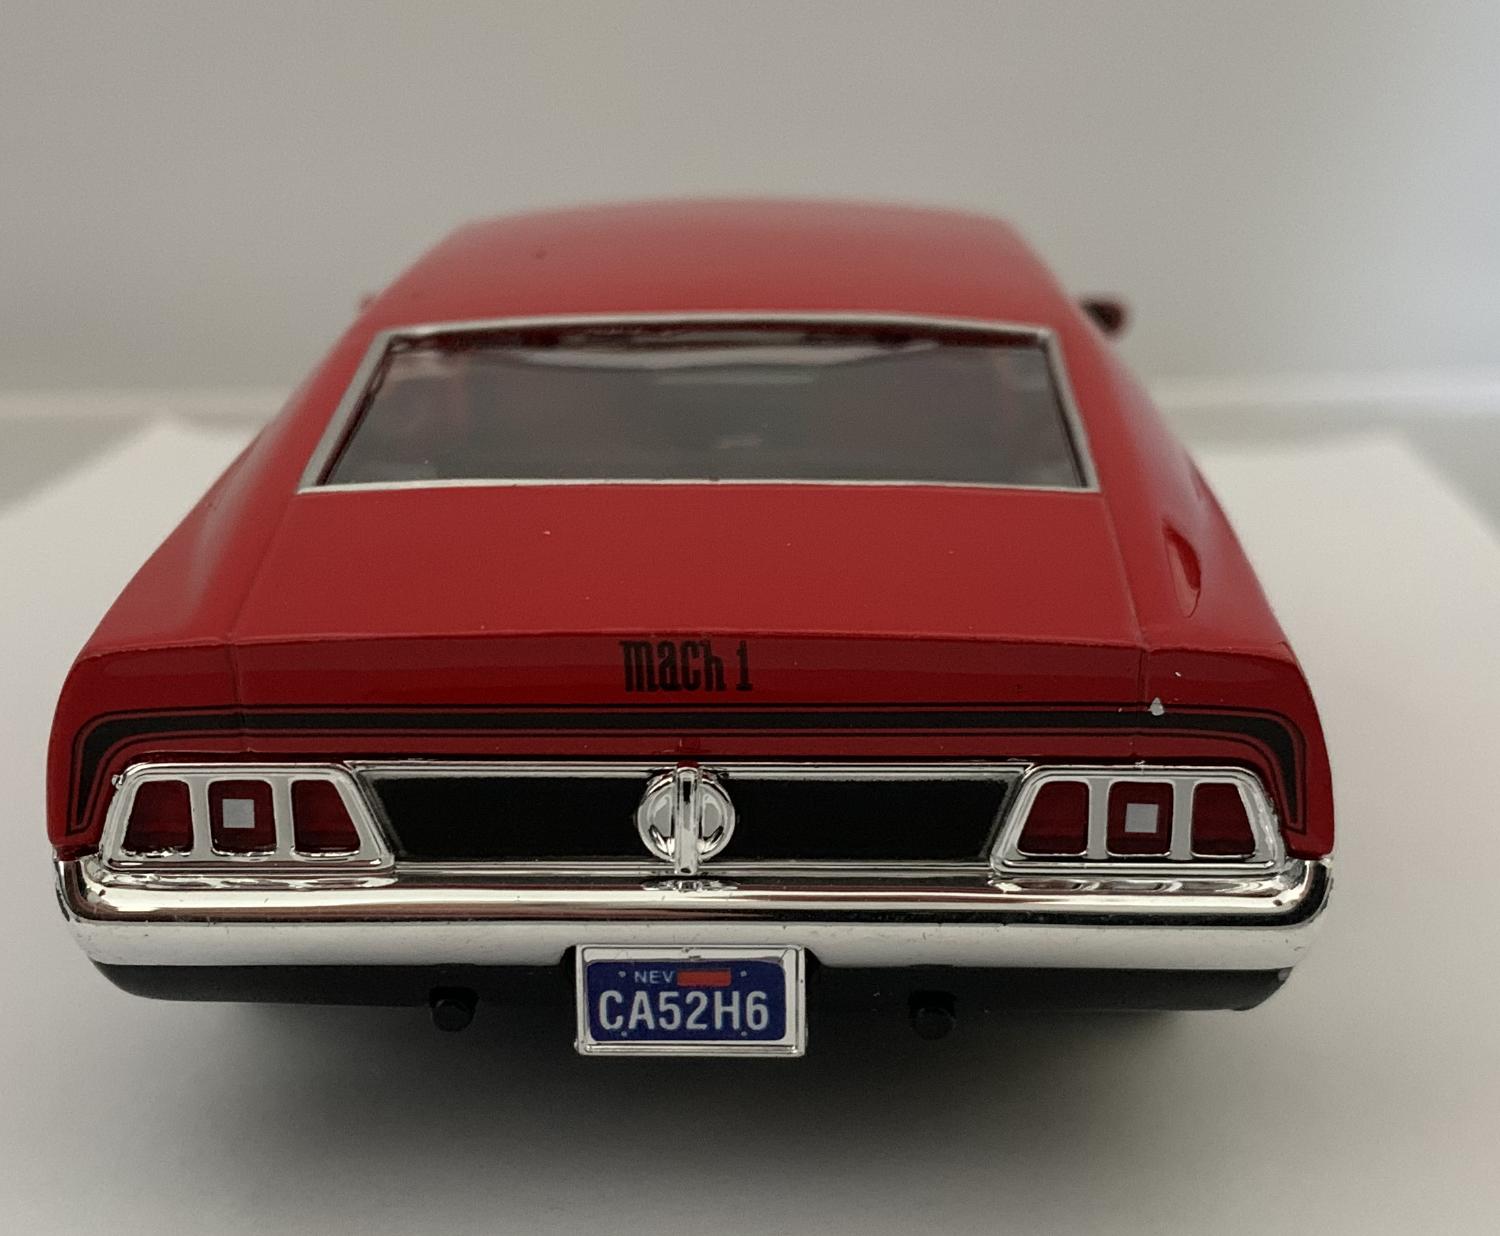 An excellent scale model of a Ford Mustang Mach 1 in red with authentic graphics, bonnet air vents and chrome wheels.